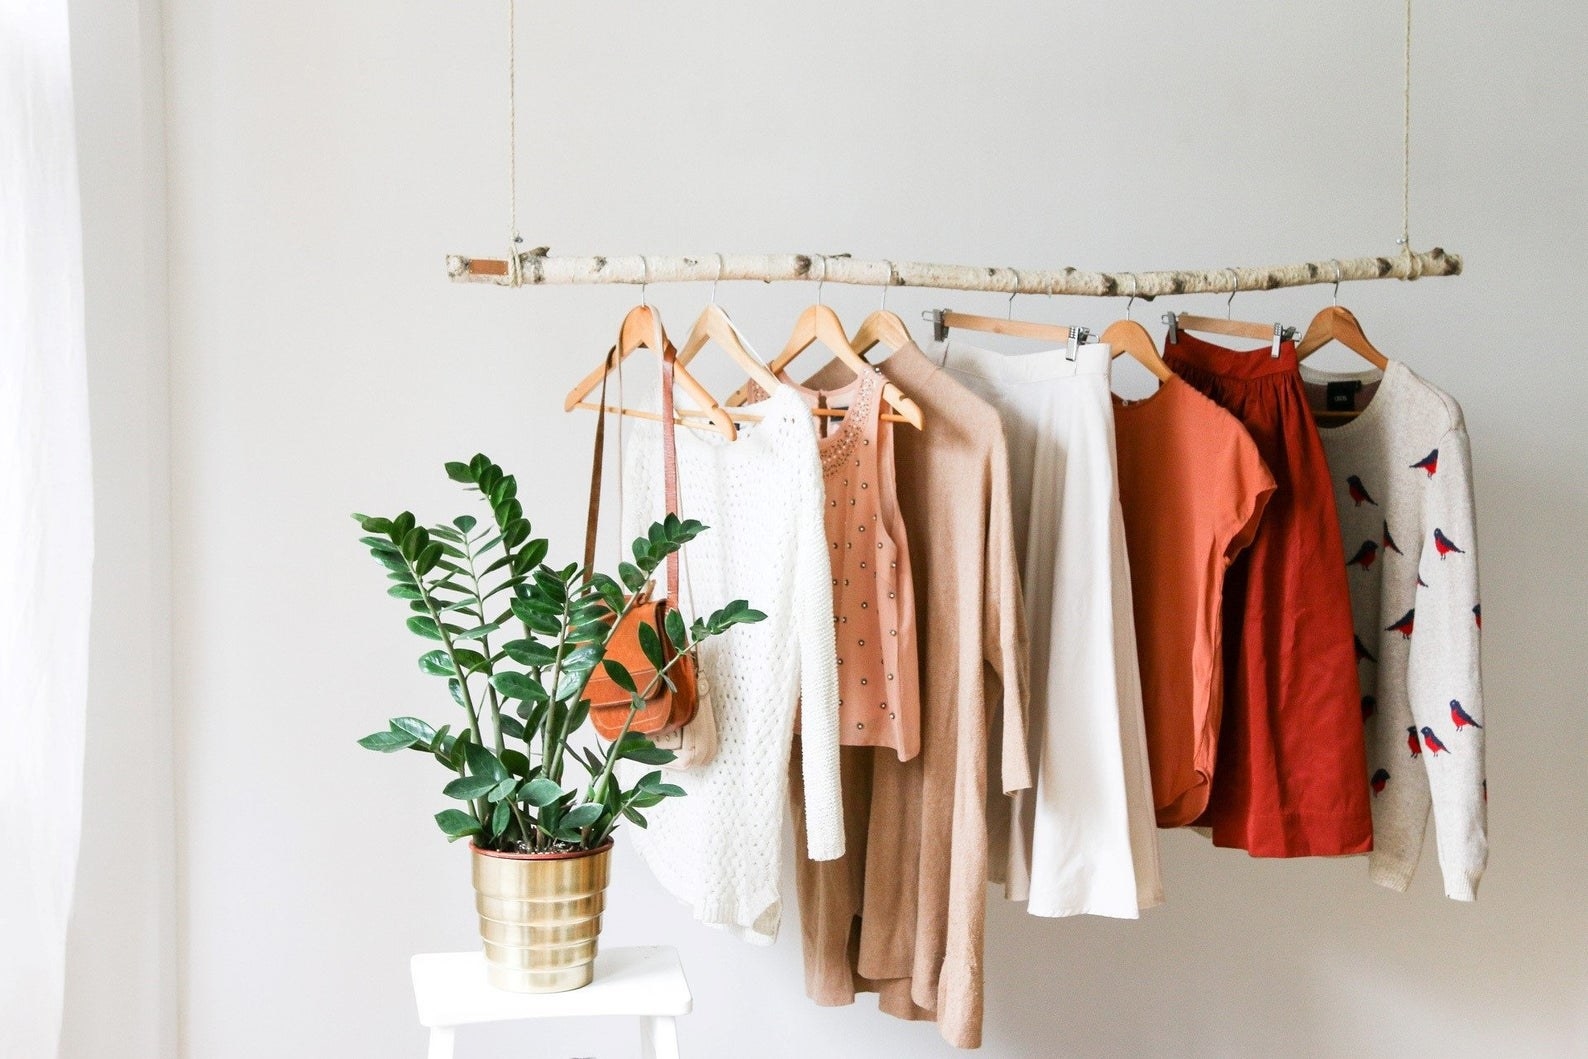 branch hangs suspended from ceiling and works as garment bar 